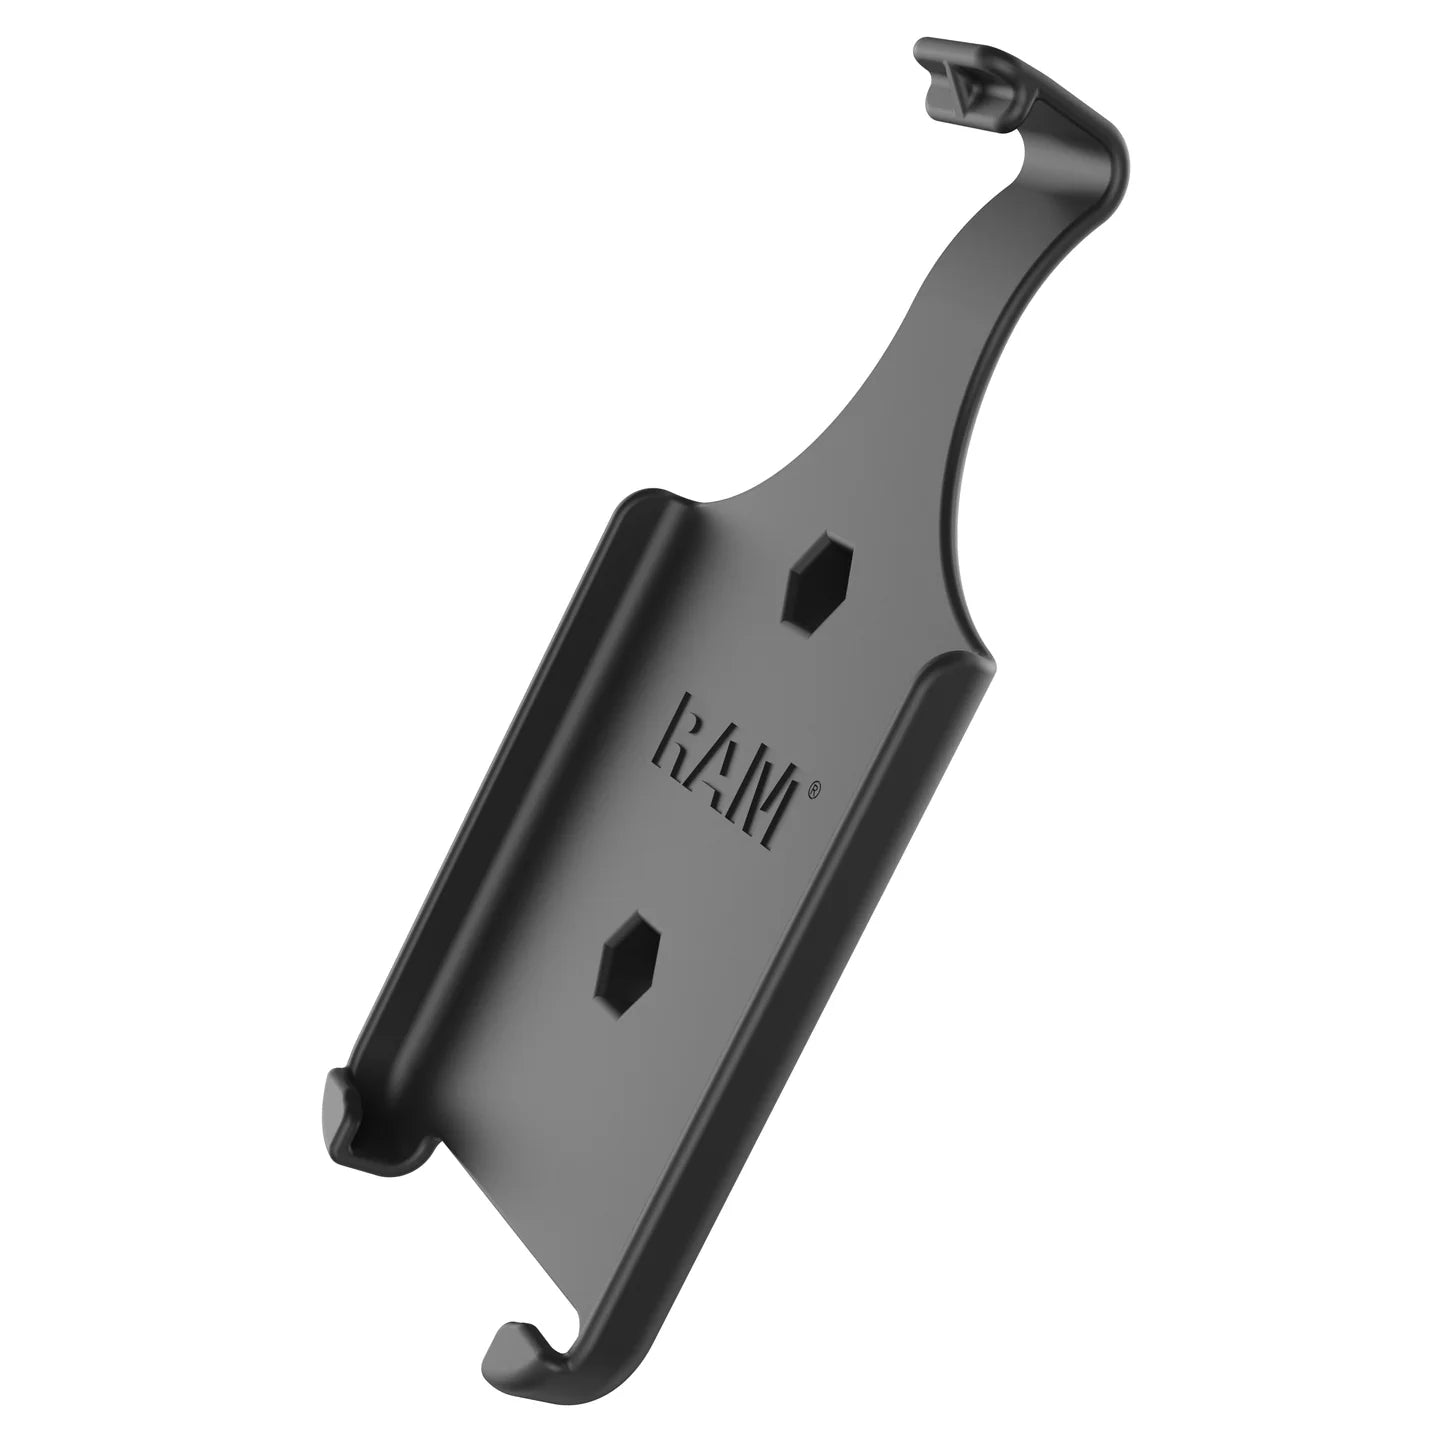 RAM® Form-Fit Cradle for Apple iPhone X & XS